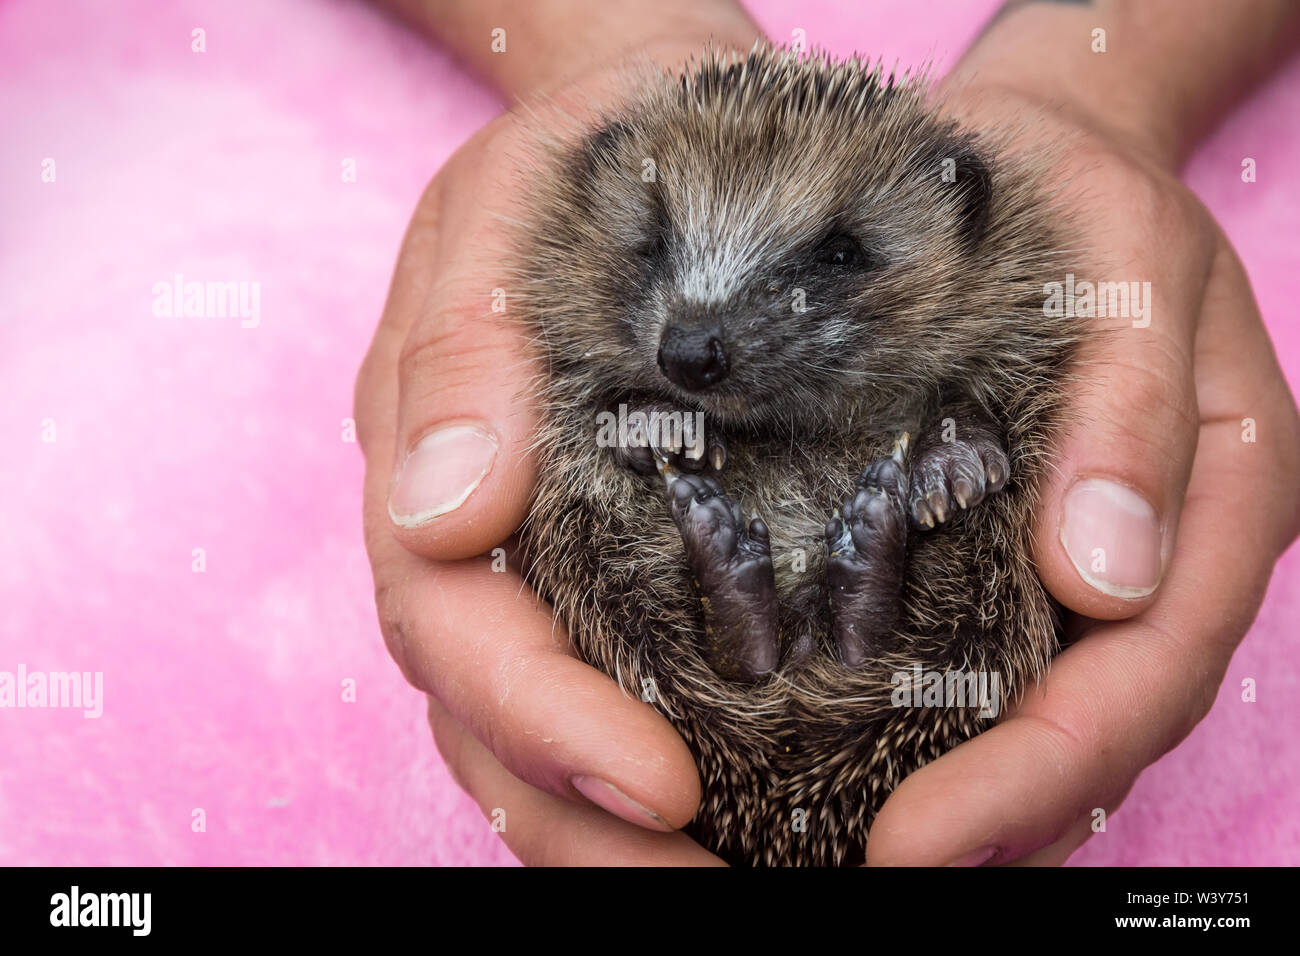 Hedgehog, (Scientific name: Erinaceus Europaeus)  a cute, tiny, wild, native, baby hoglet being cupped in human hands.  Facing forward. Close up. Stock Photo